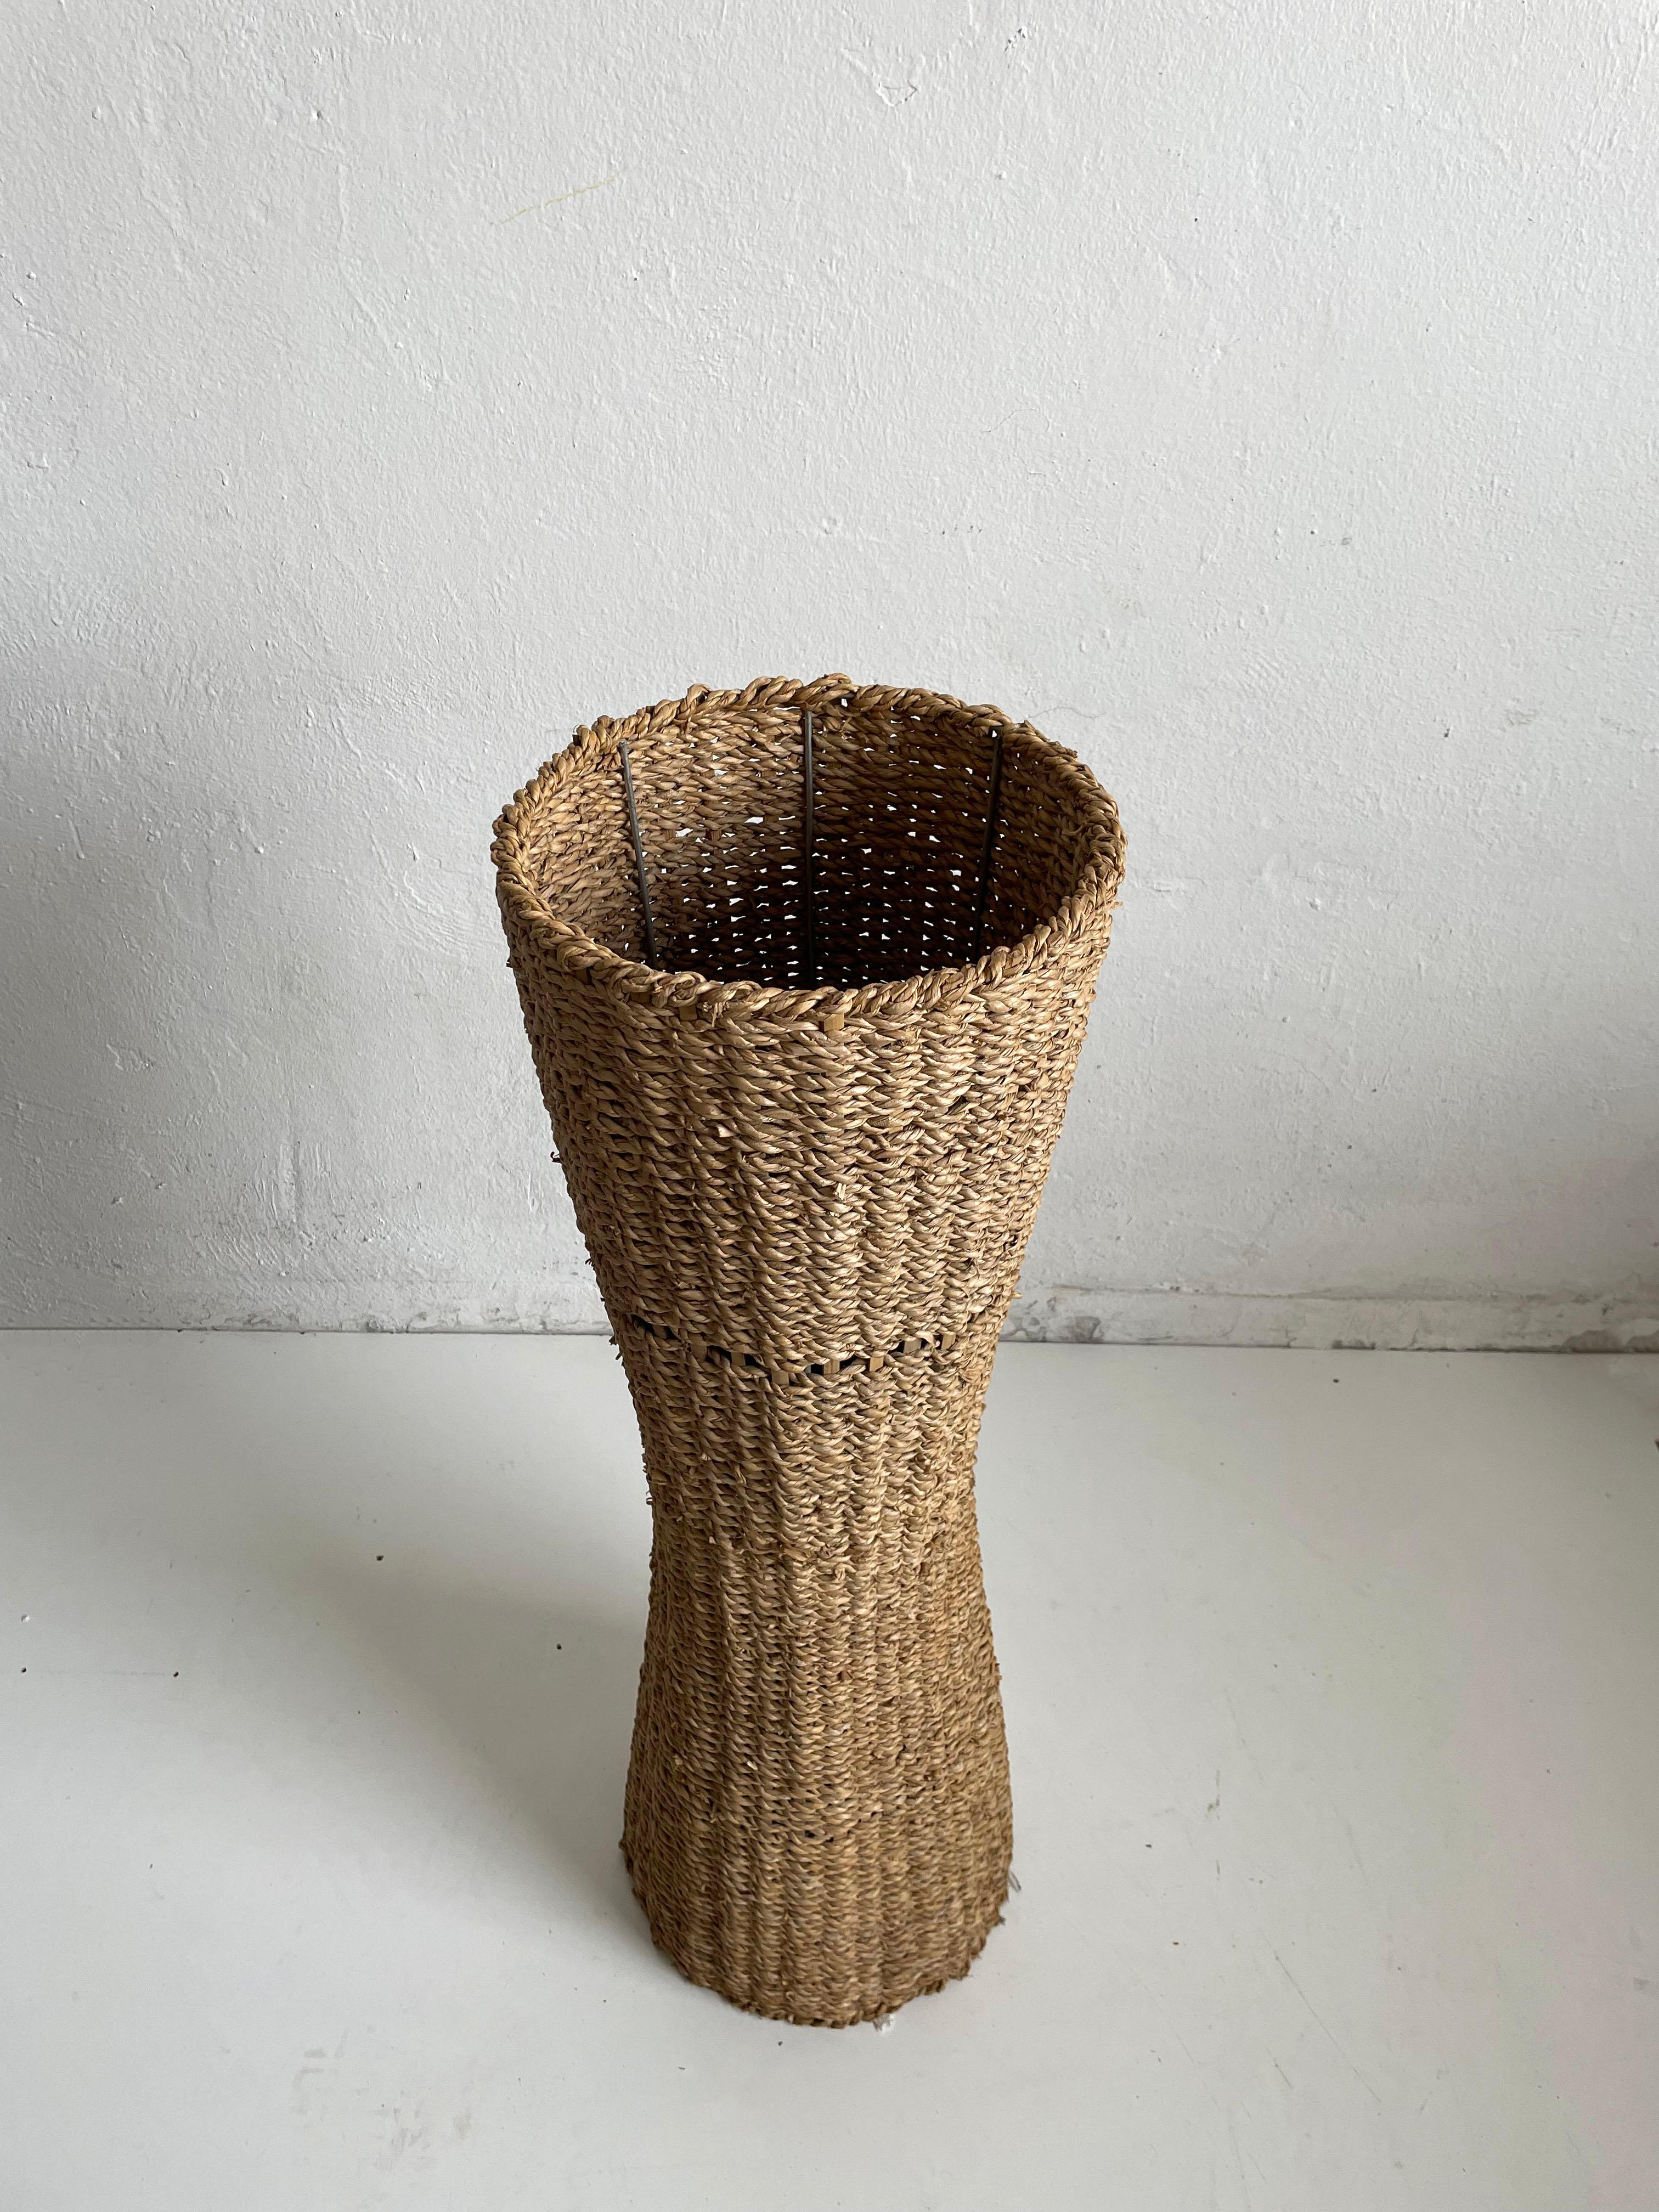 Metal Mid Century Handwoven Banana Leaf Flower Pot Stand, Italy 1970s For Sale